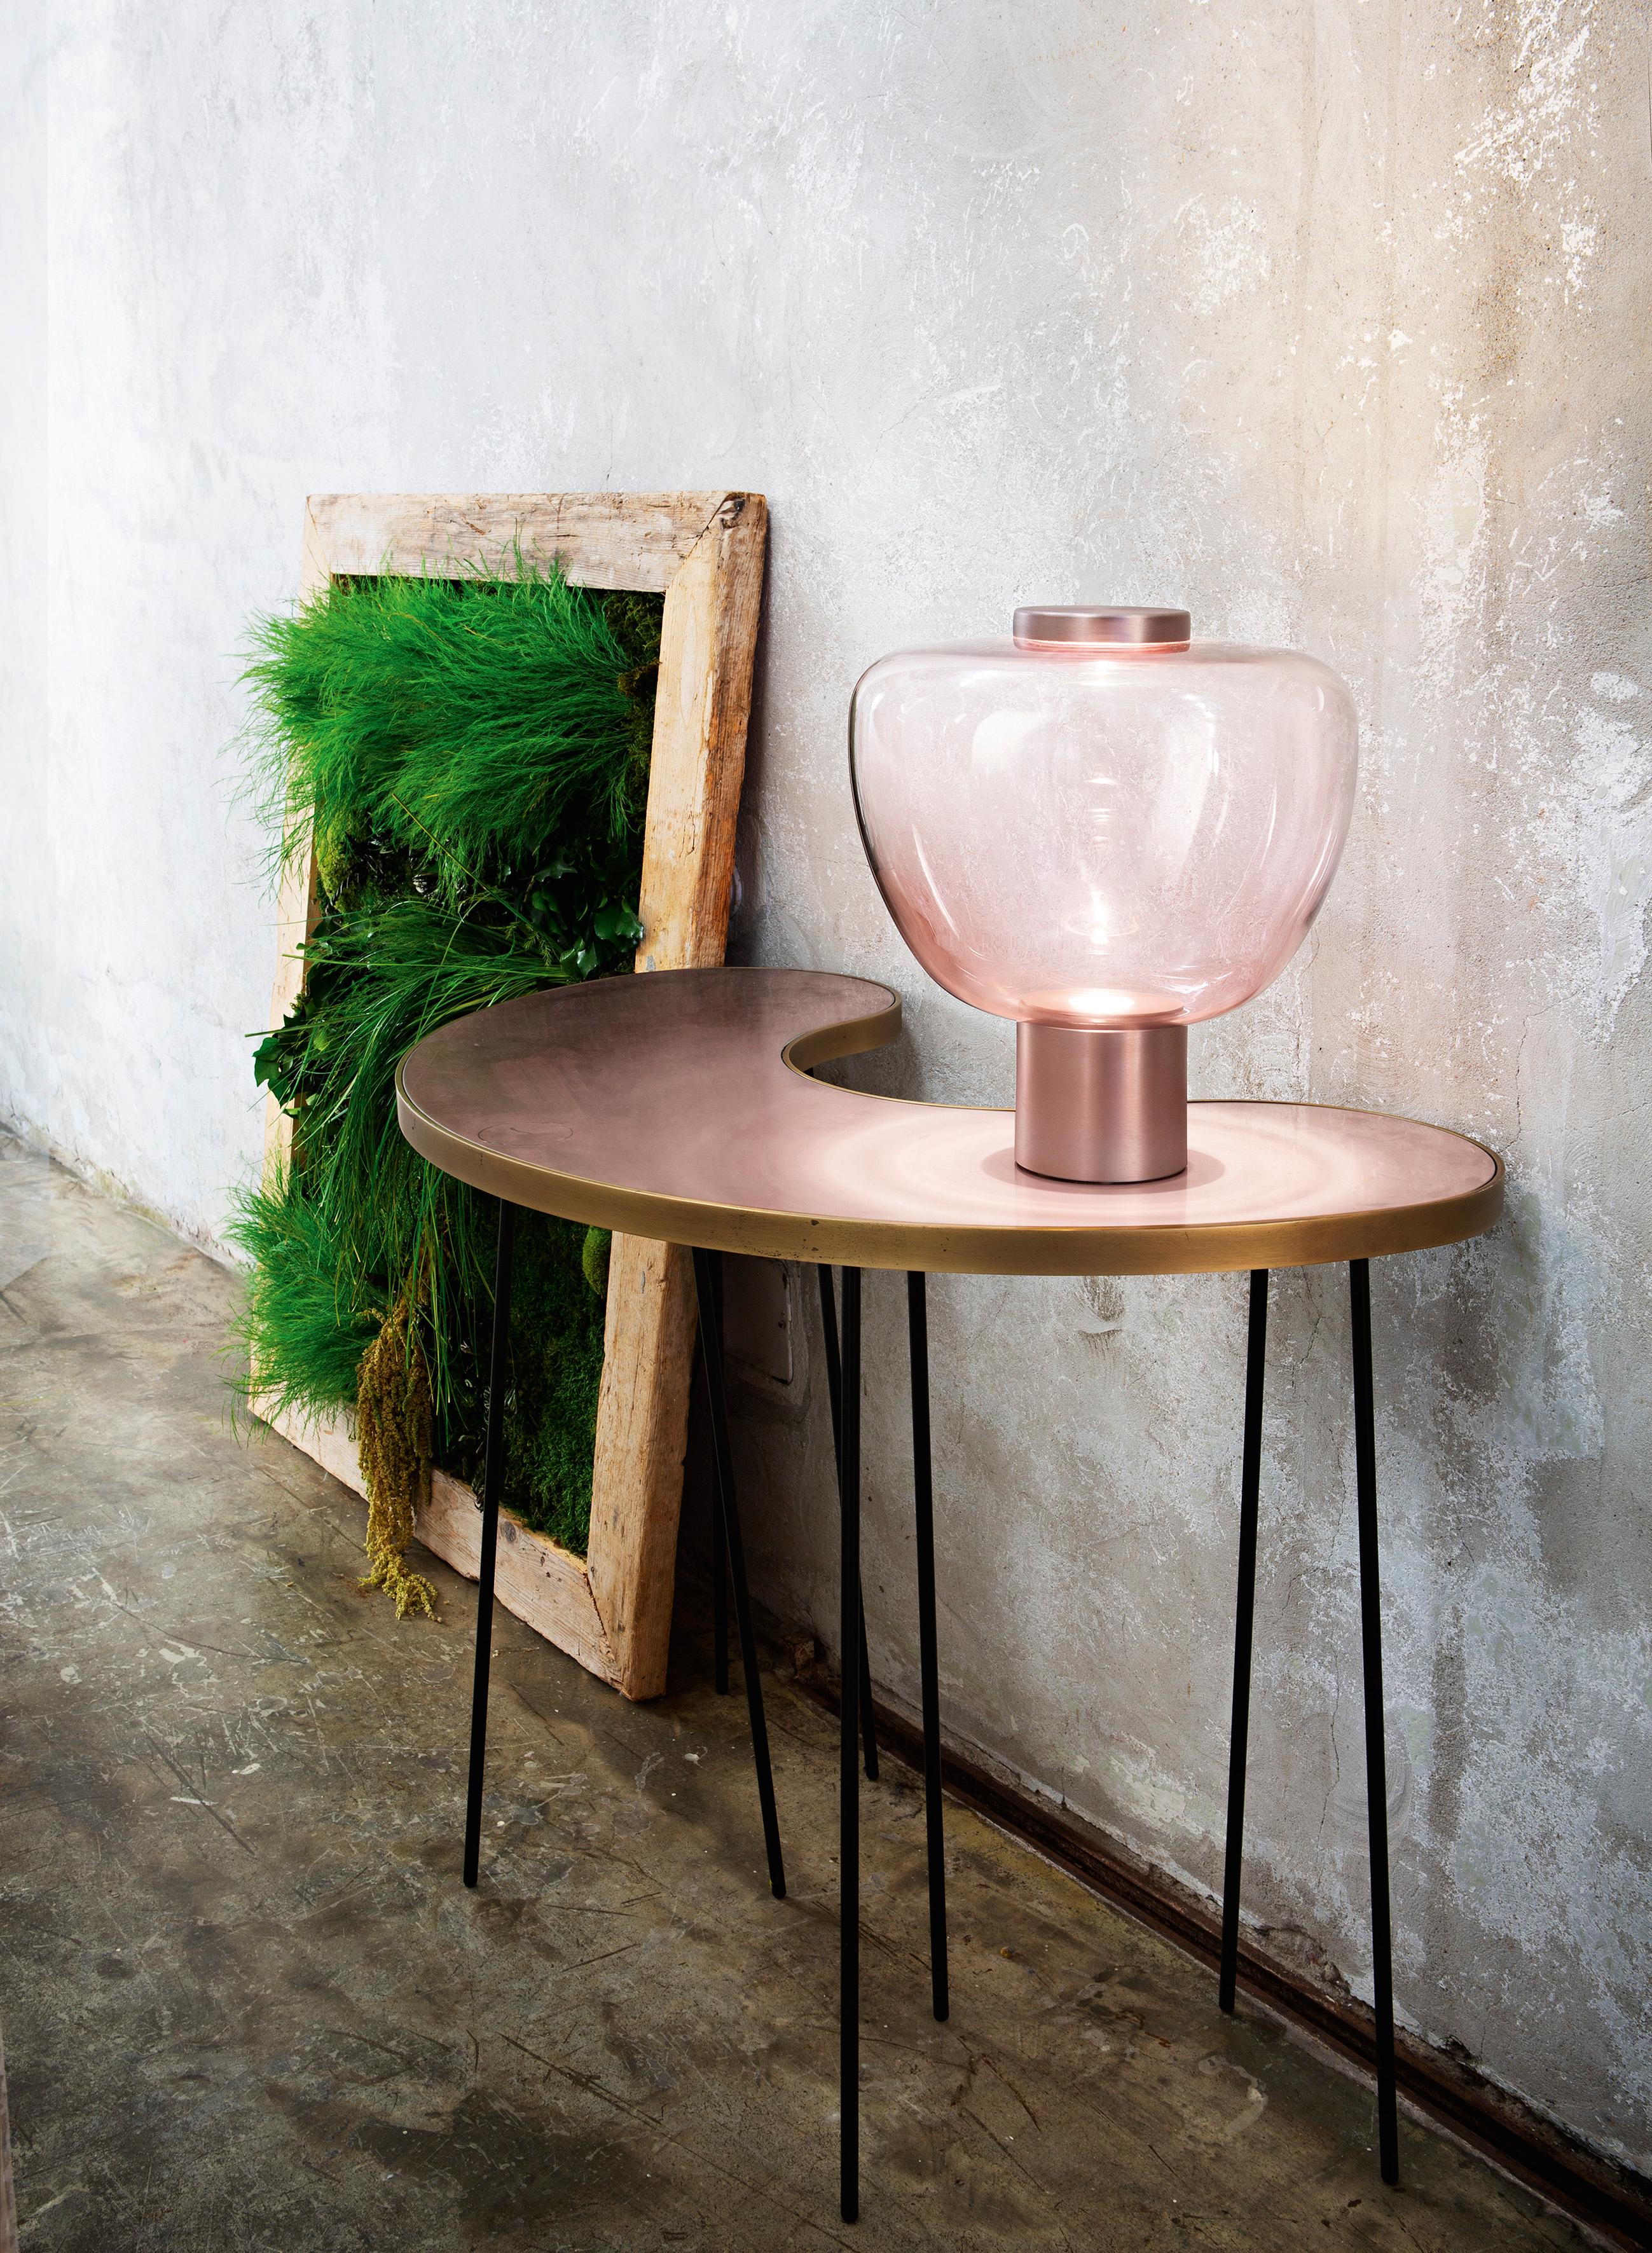 Contemporary Vistosi Riflesso Table Lamp in Light Amethyst Transaprent Glass And Copper Frame For Sale